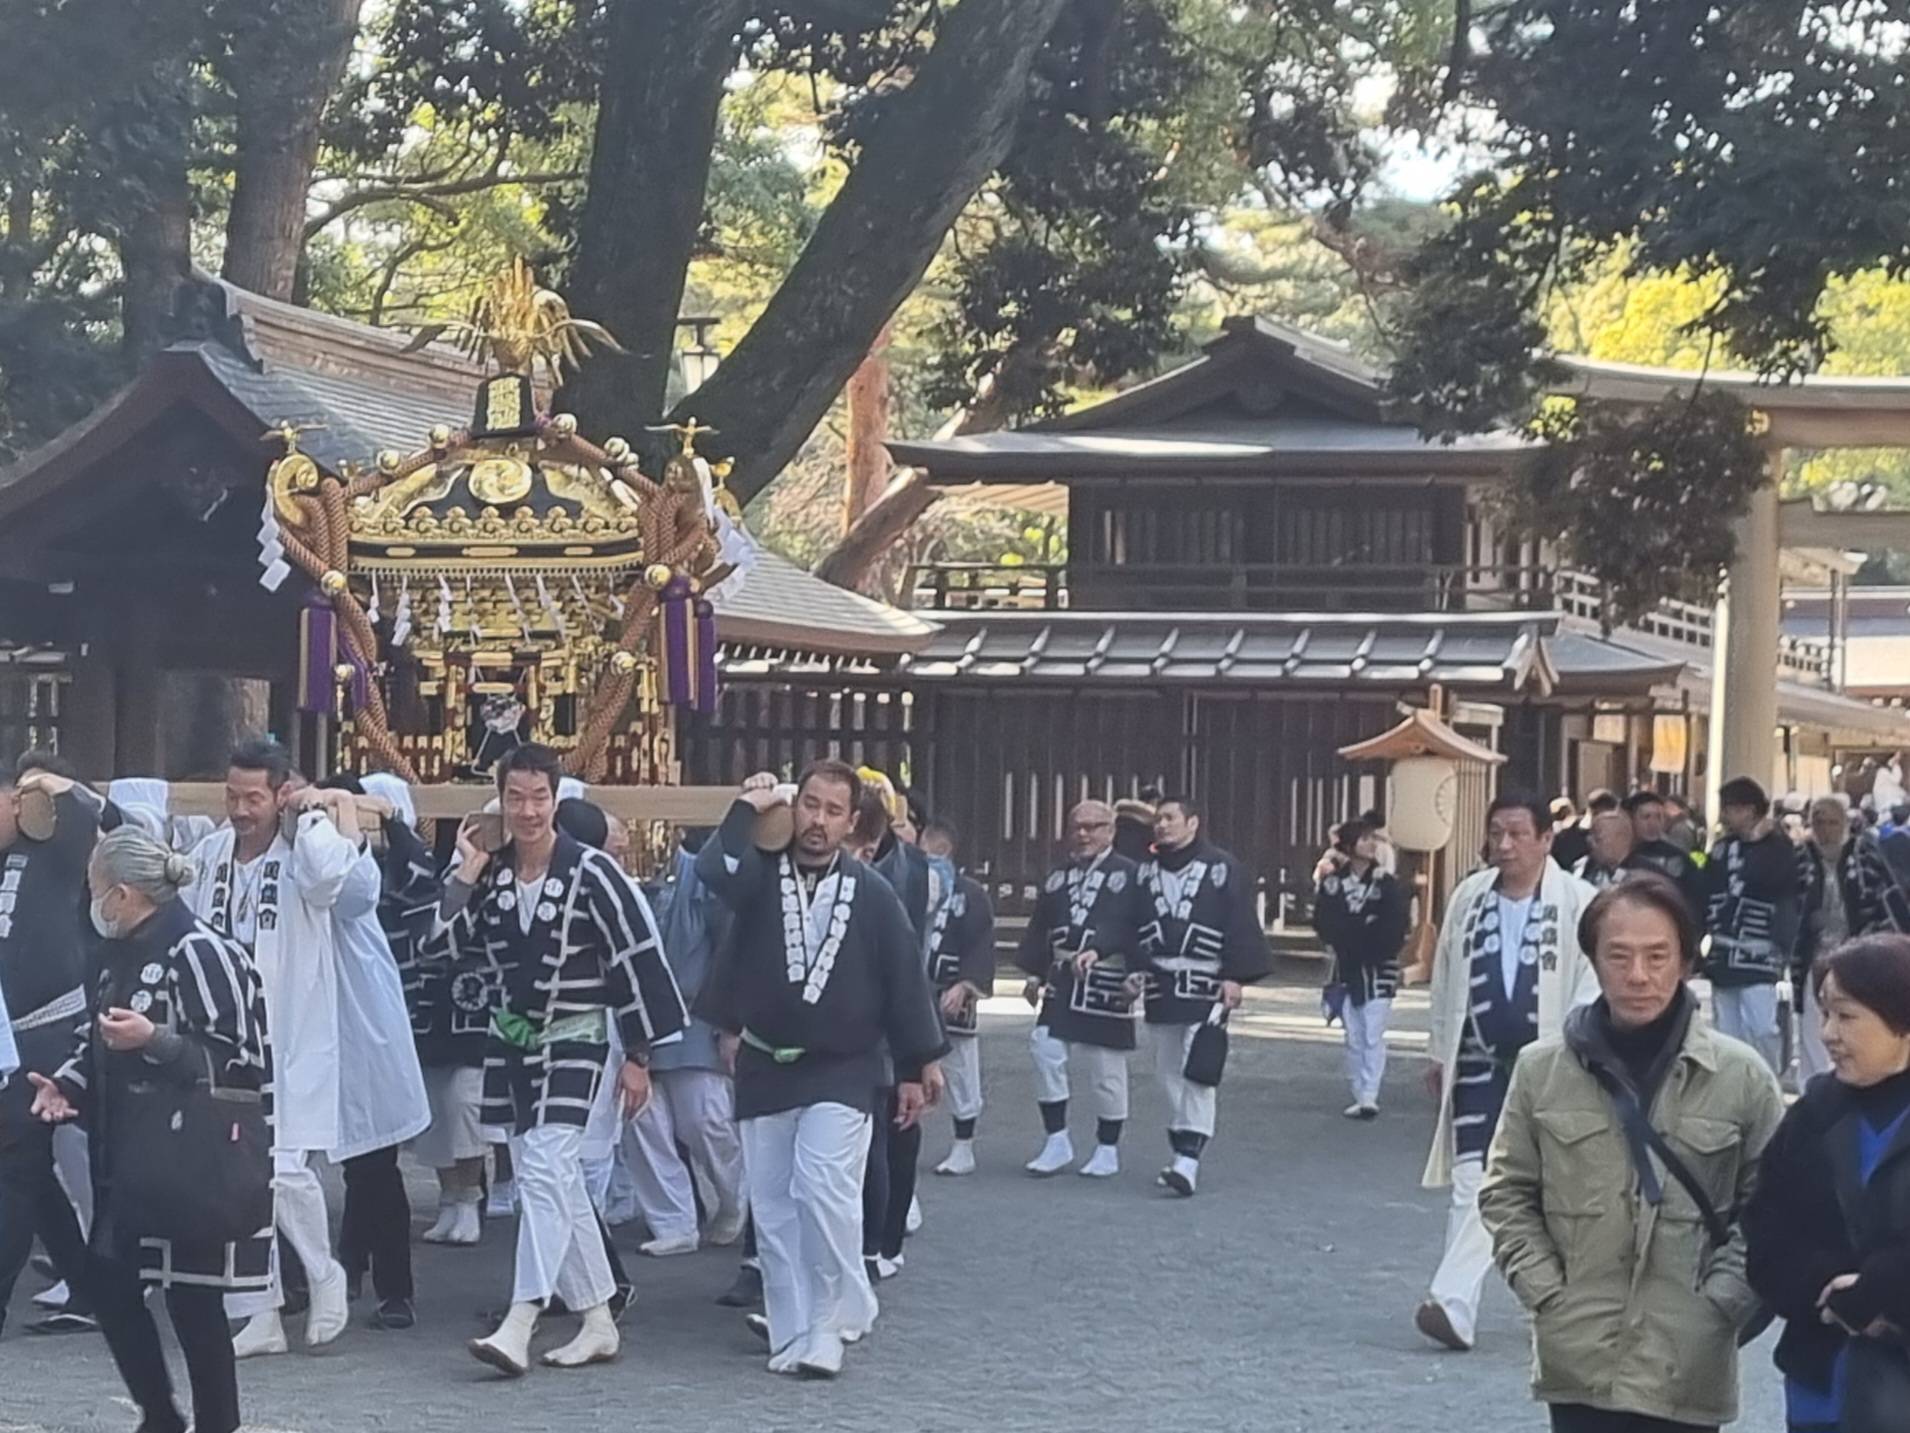 It looks like we had missed to main parade and ceremonies to the main shrine and everyone was was basically packing up and going home. Still it was all very interesting to see.